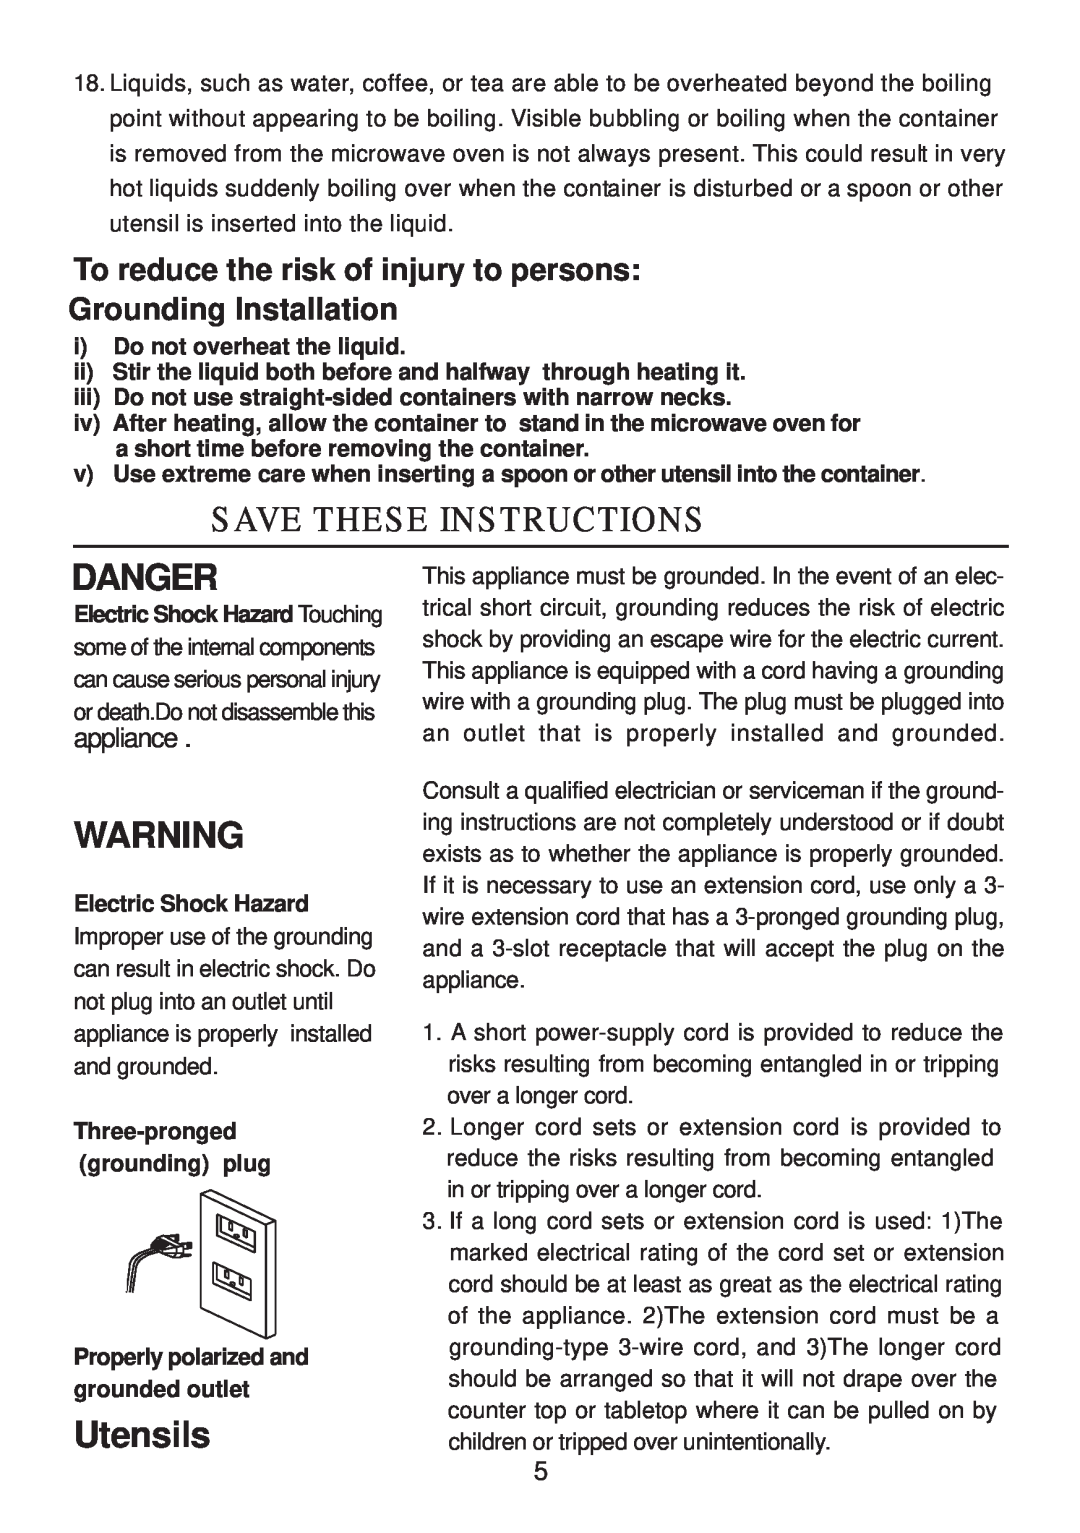 Sunbeam SMW730 Save These Instructions, Danger, Utensils, To reduce the risk of injury to persons Grounding Installation 